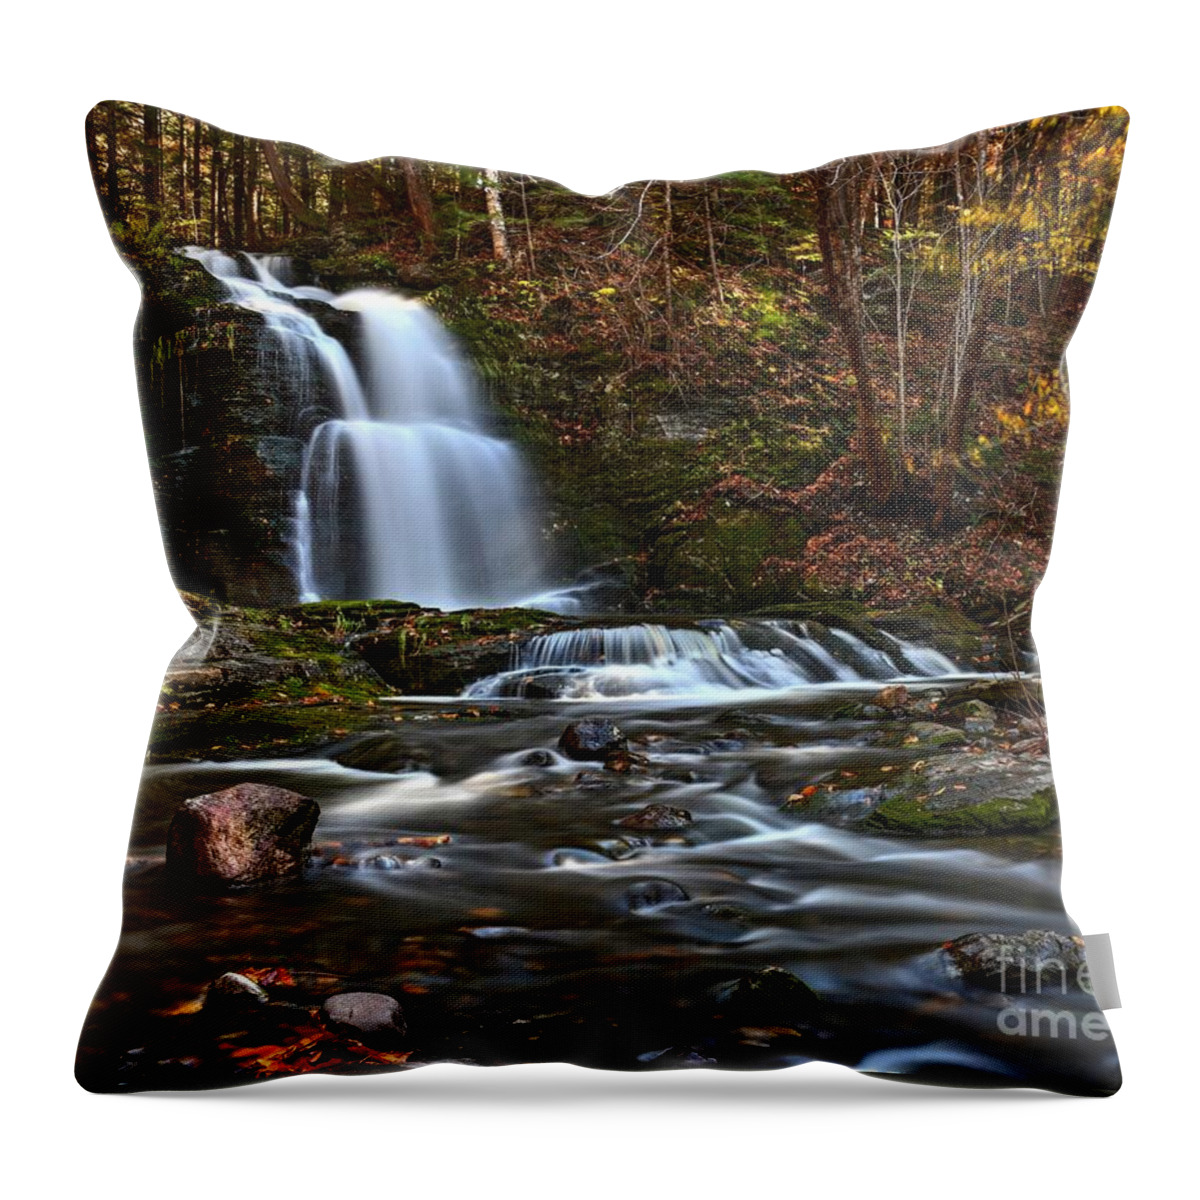 Waterfalls Throw Pillow featuring the photograph Wiswall Brook Falls by Steve Brown